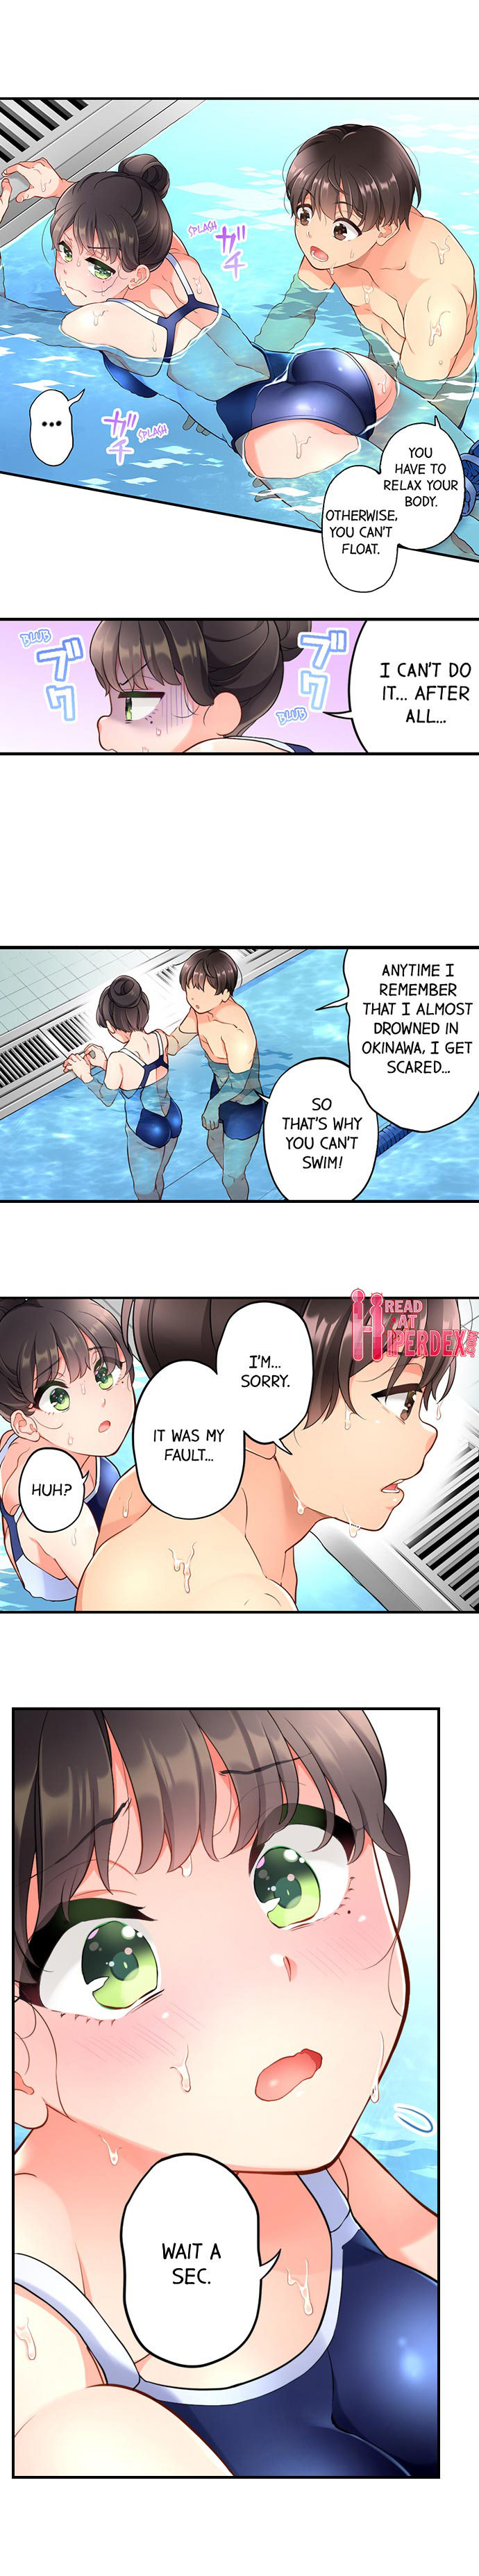 My Friend Came Back From the Future to Fuck Me - Chapter 13 Page 4